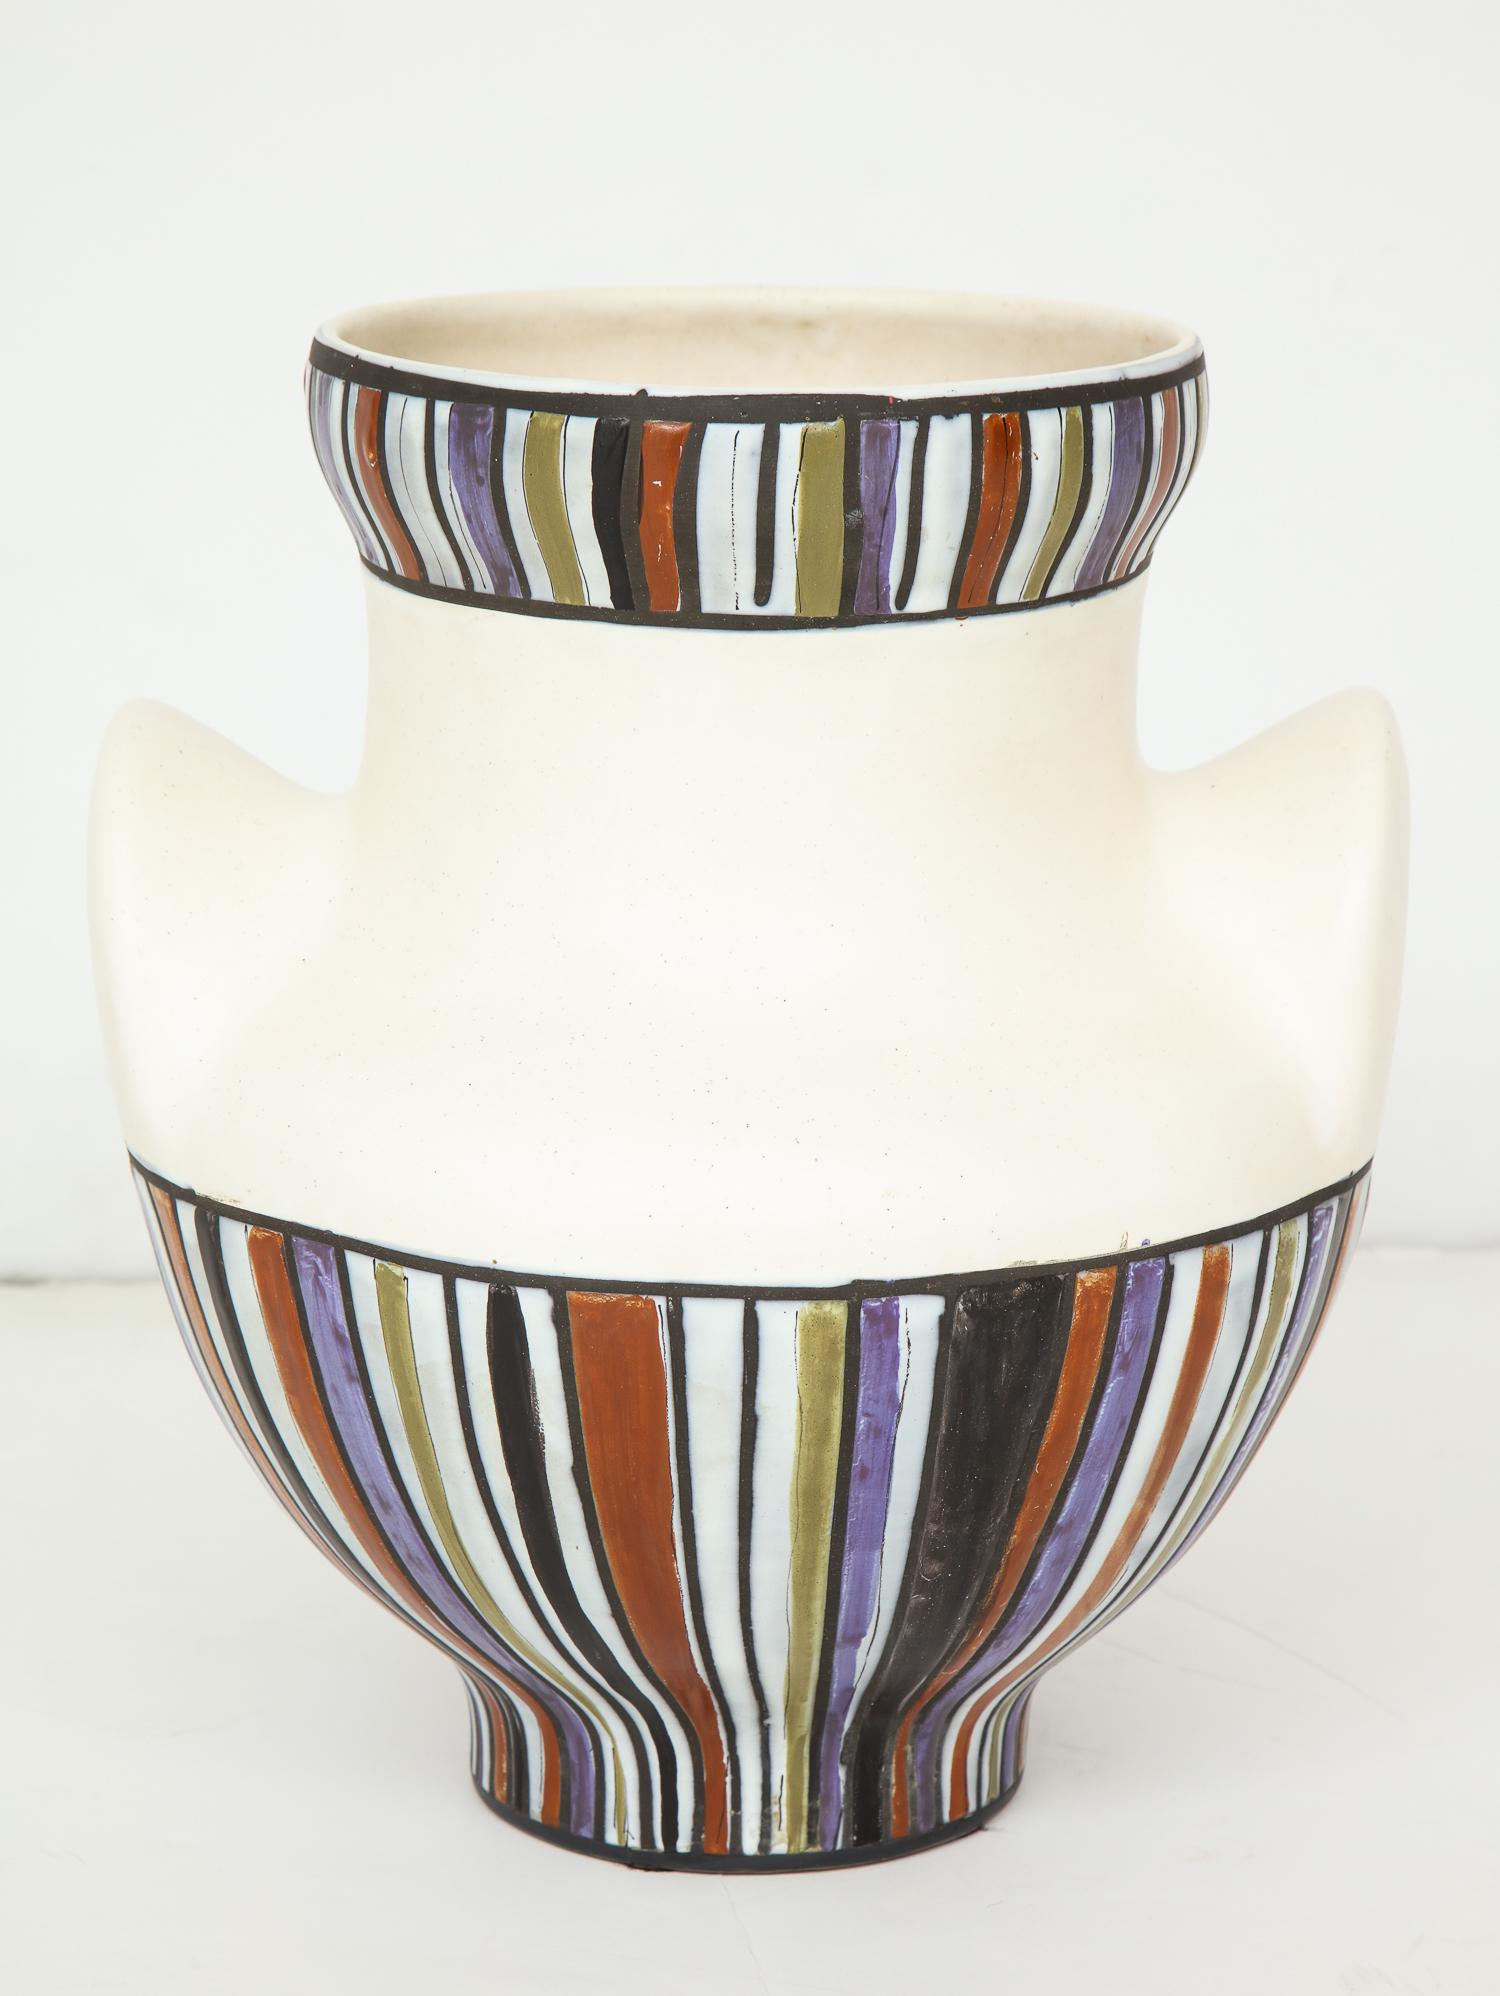 Ceramic vase form with ears (oreilles) and applied polychrome enamel paint, by Vallauris master Roger Capron. The largest, and scarcest, of three sizes. Vividly colored and fluidly drawn pattern. Signed “Capron Vallauris” to base